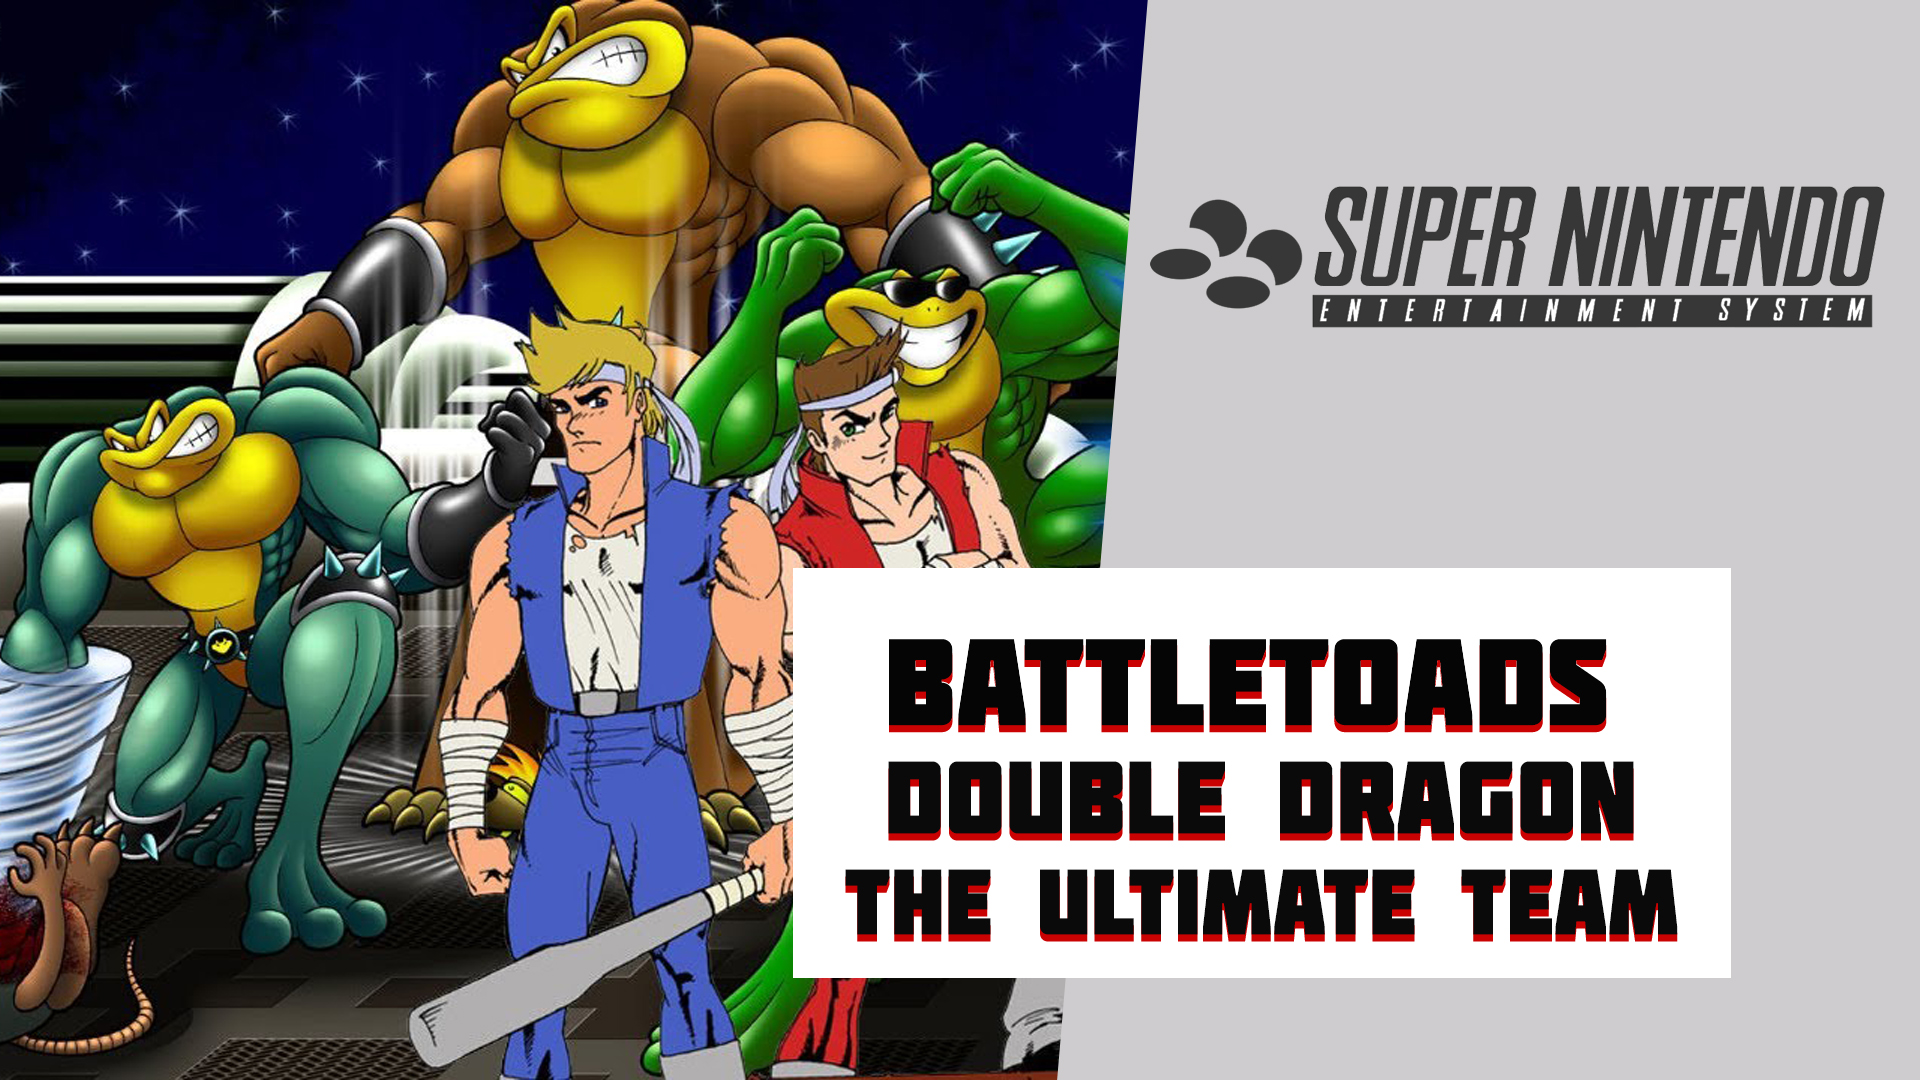 Battletoads & Double Dragon - the Ultimate Team. Battletoads Double Dragon 2022. Battletoads ultimate team